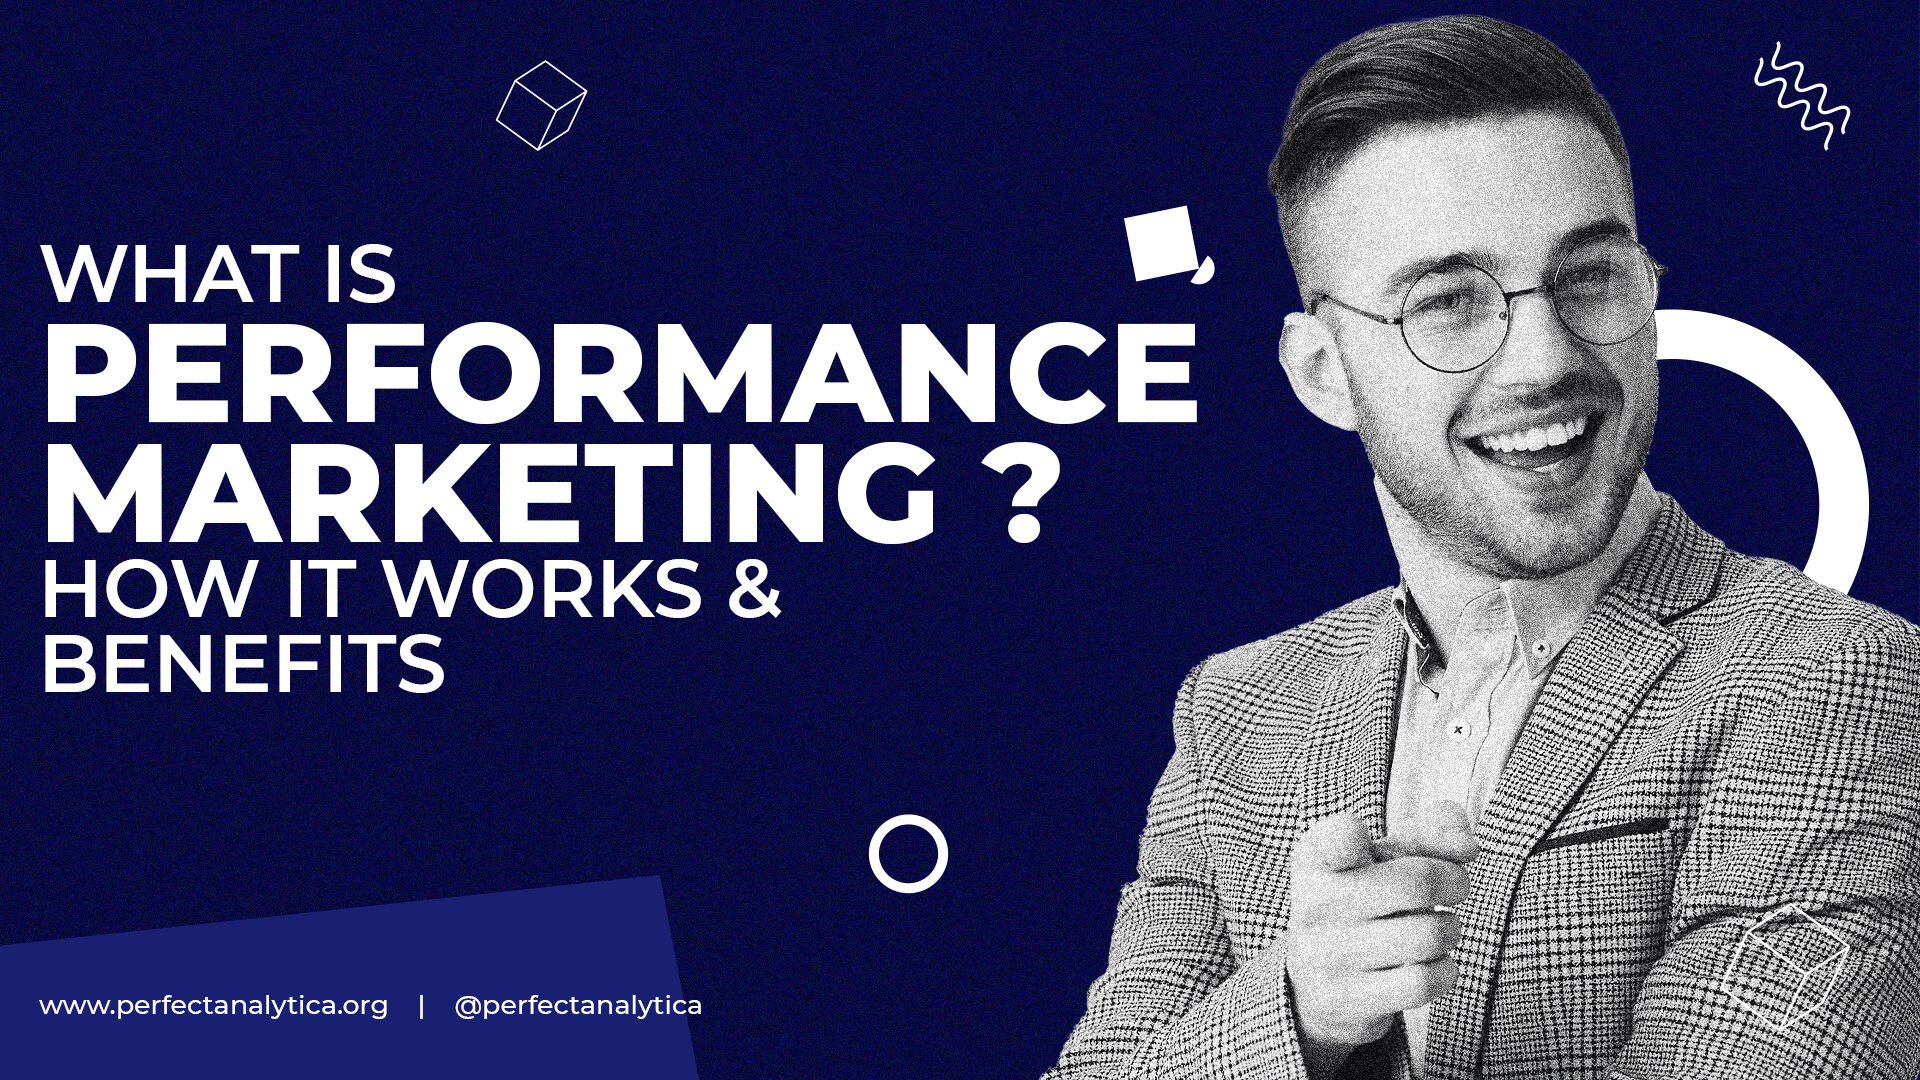 What is Performance Marketing? How it works and benefits